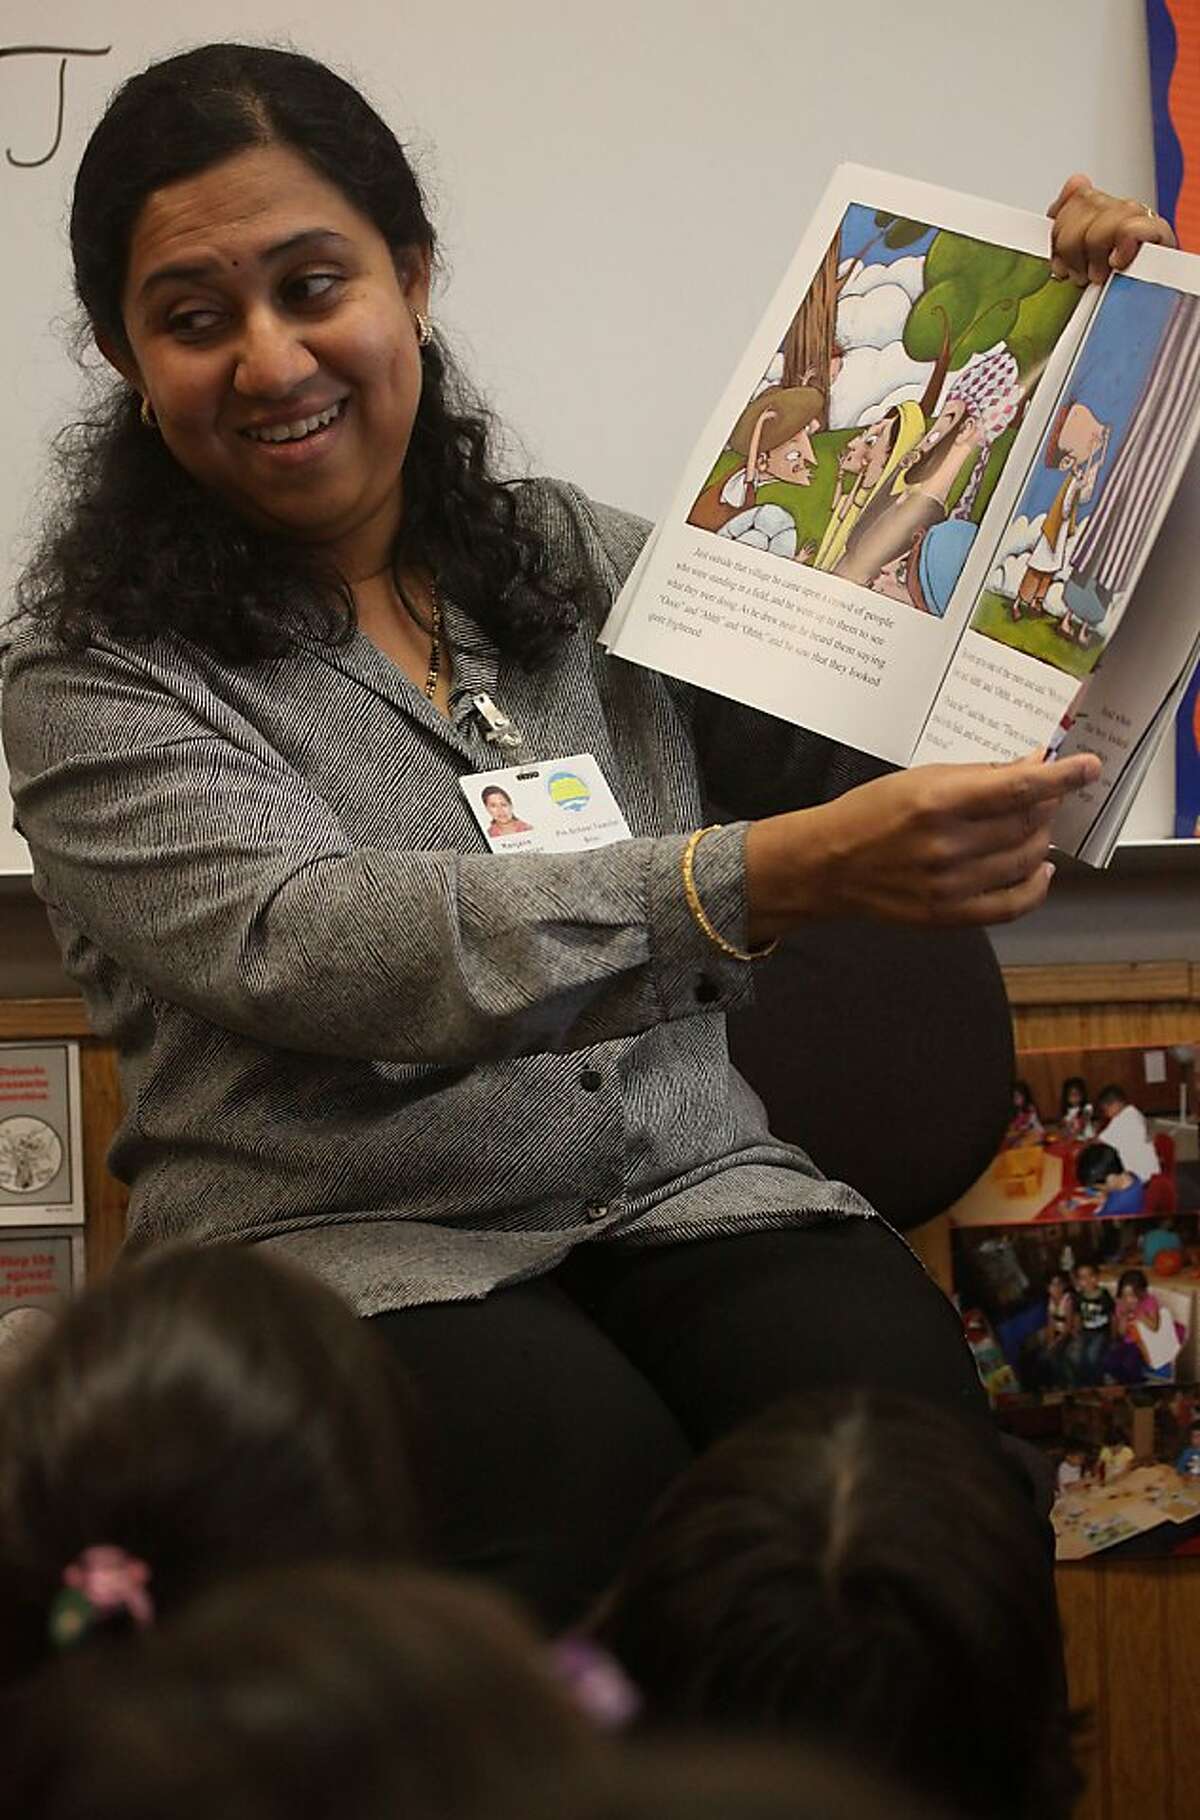 Teacher Ranjana Subramanian at State preschool in Brier Elementary school in Fremont, Calif., reading "The Clever Boy and the Terrible, Dangerous Animal" by Idries Shah from Hoopoe Books on Monday, November 14, 2011. Hoopoe Books is a Palo Alto publishing company which just received a grant from the state department.